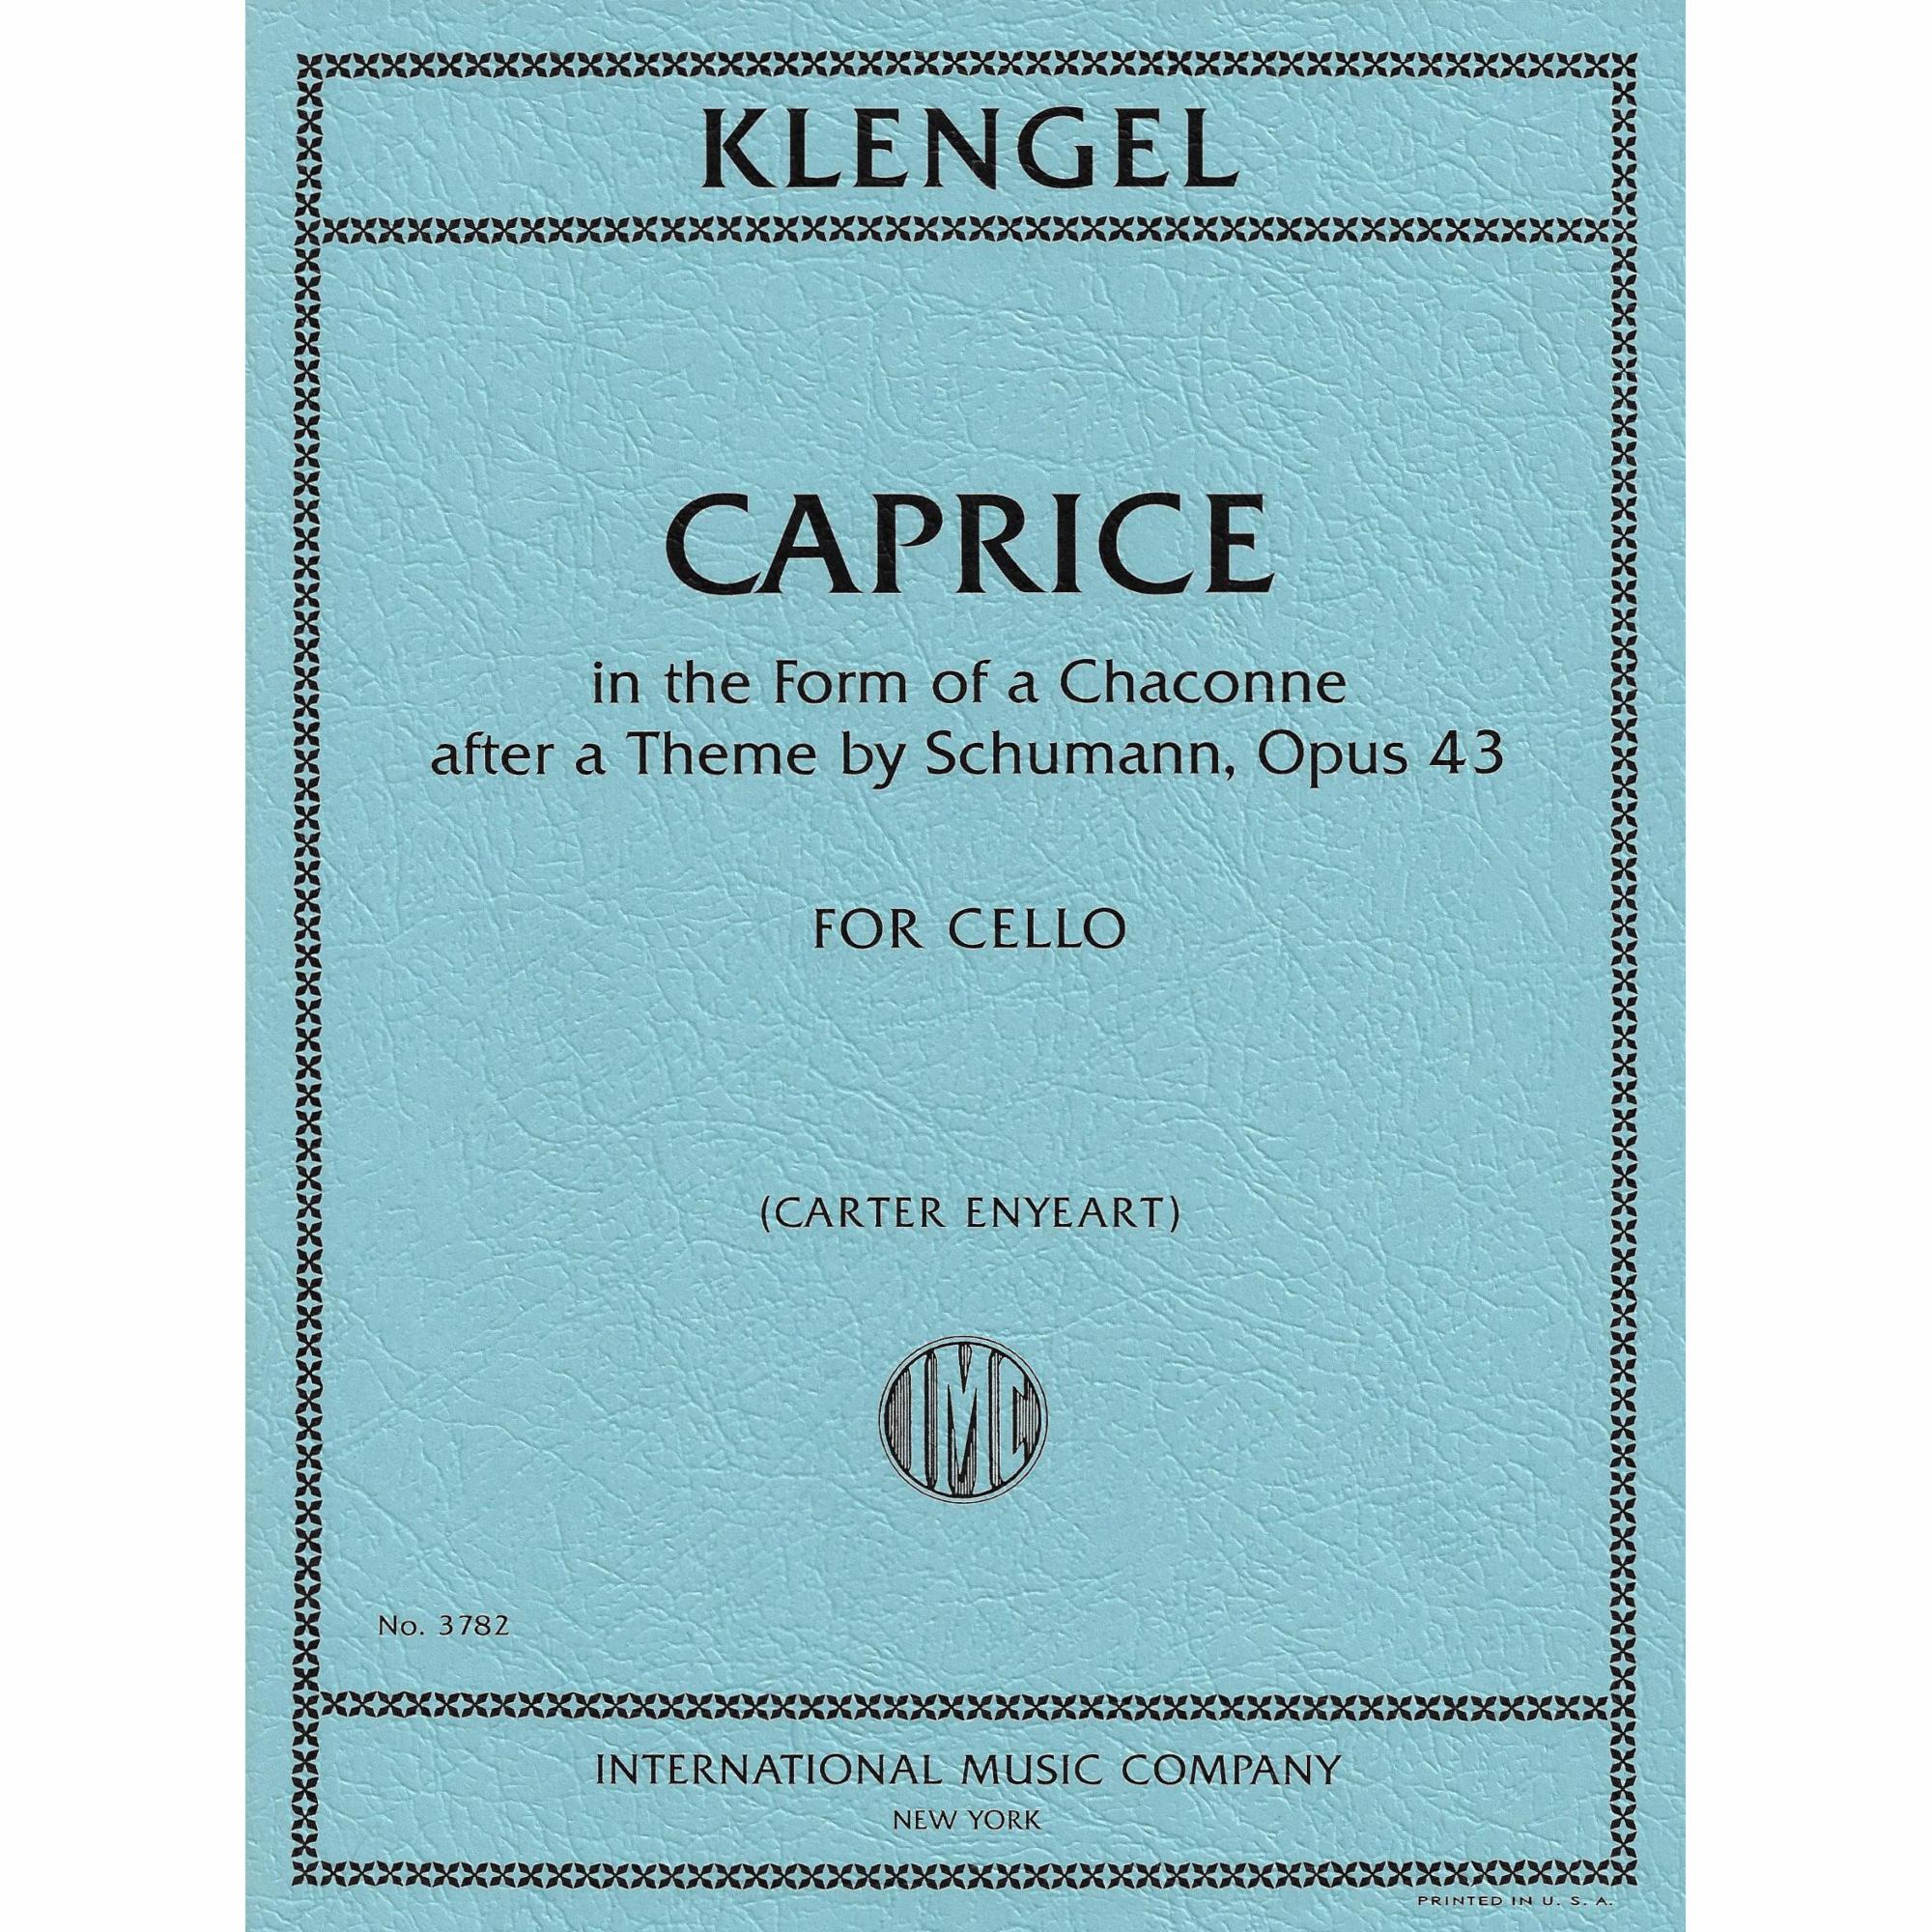 Klengel -- Caprice, Op. 43 for Solo Cello